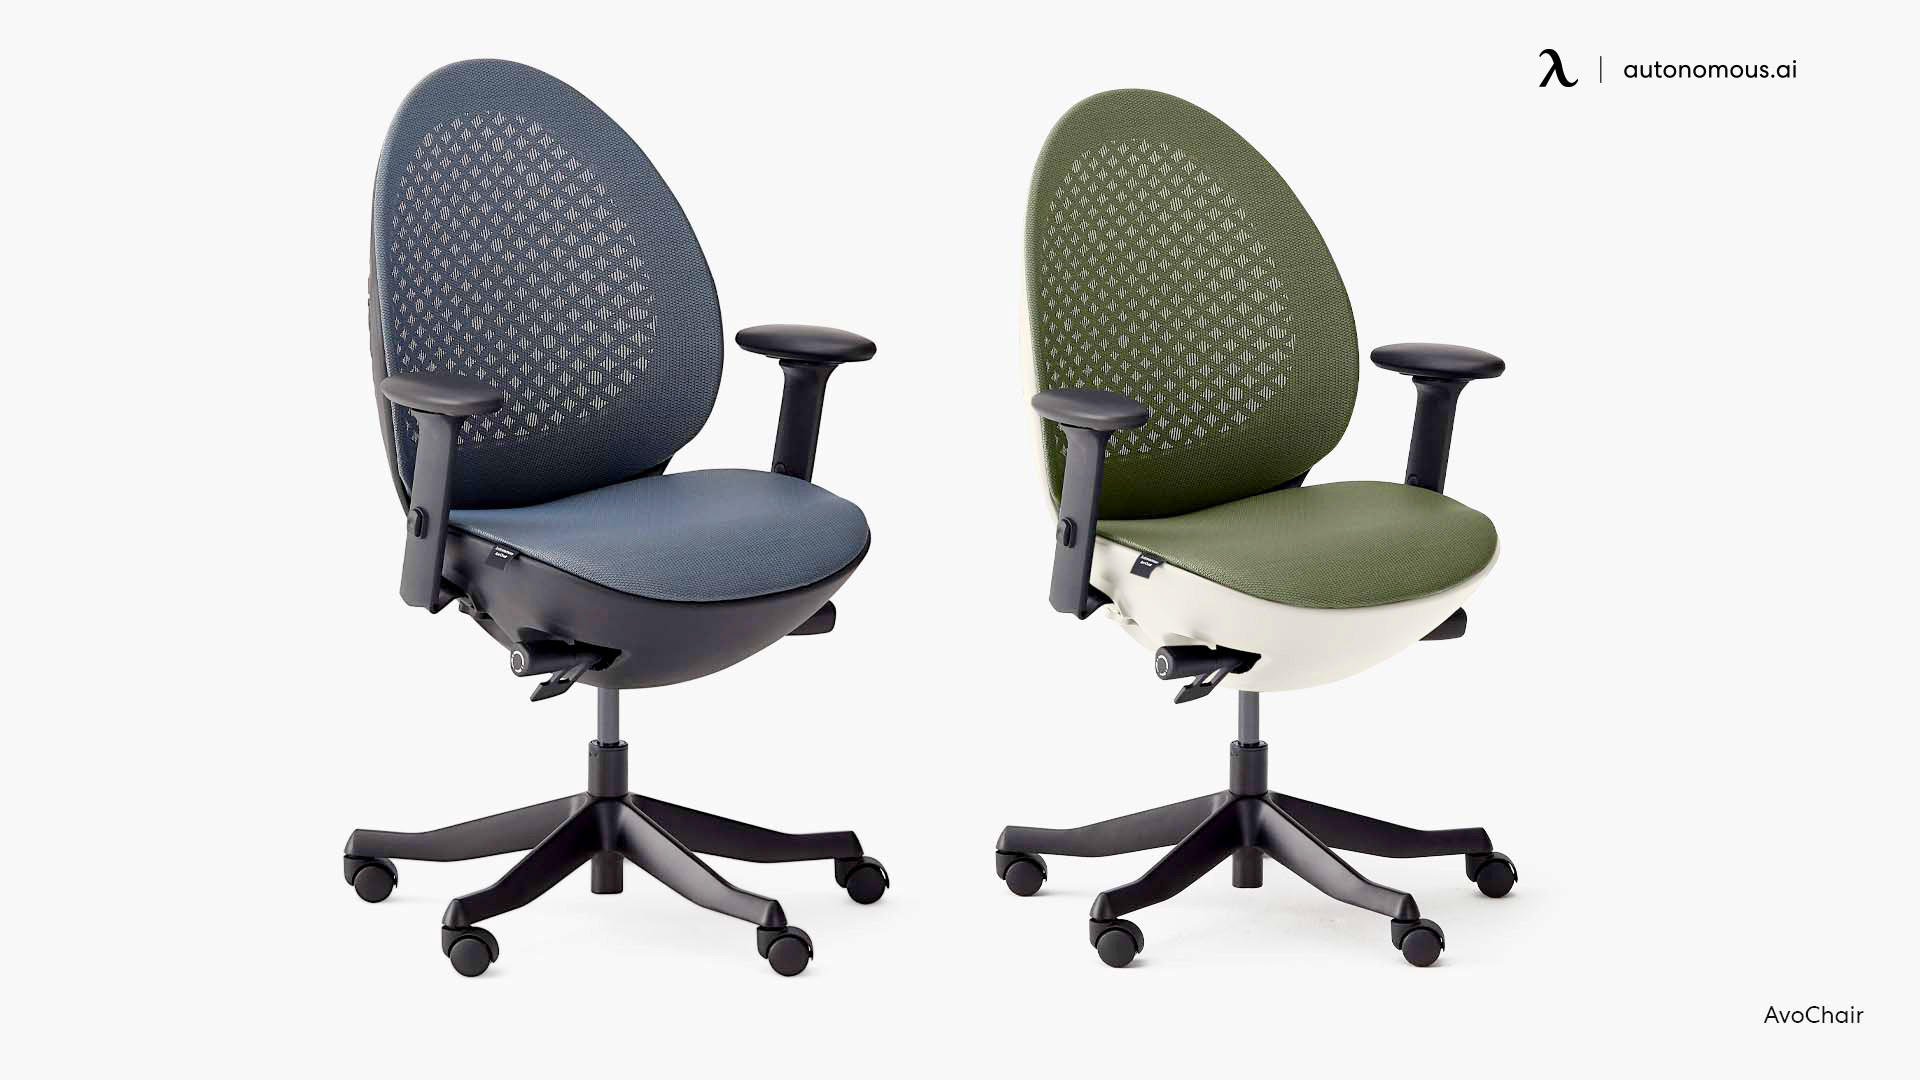 AvoChair best chair for lower back and hip pain